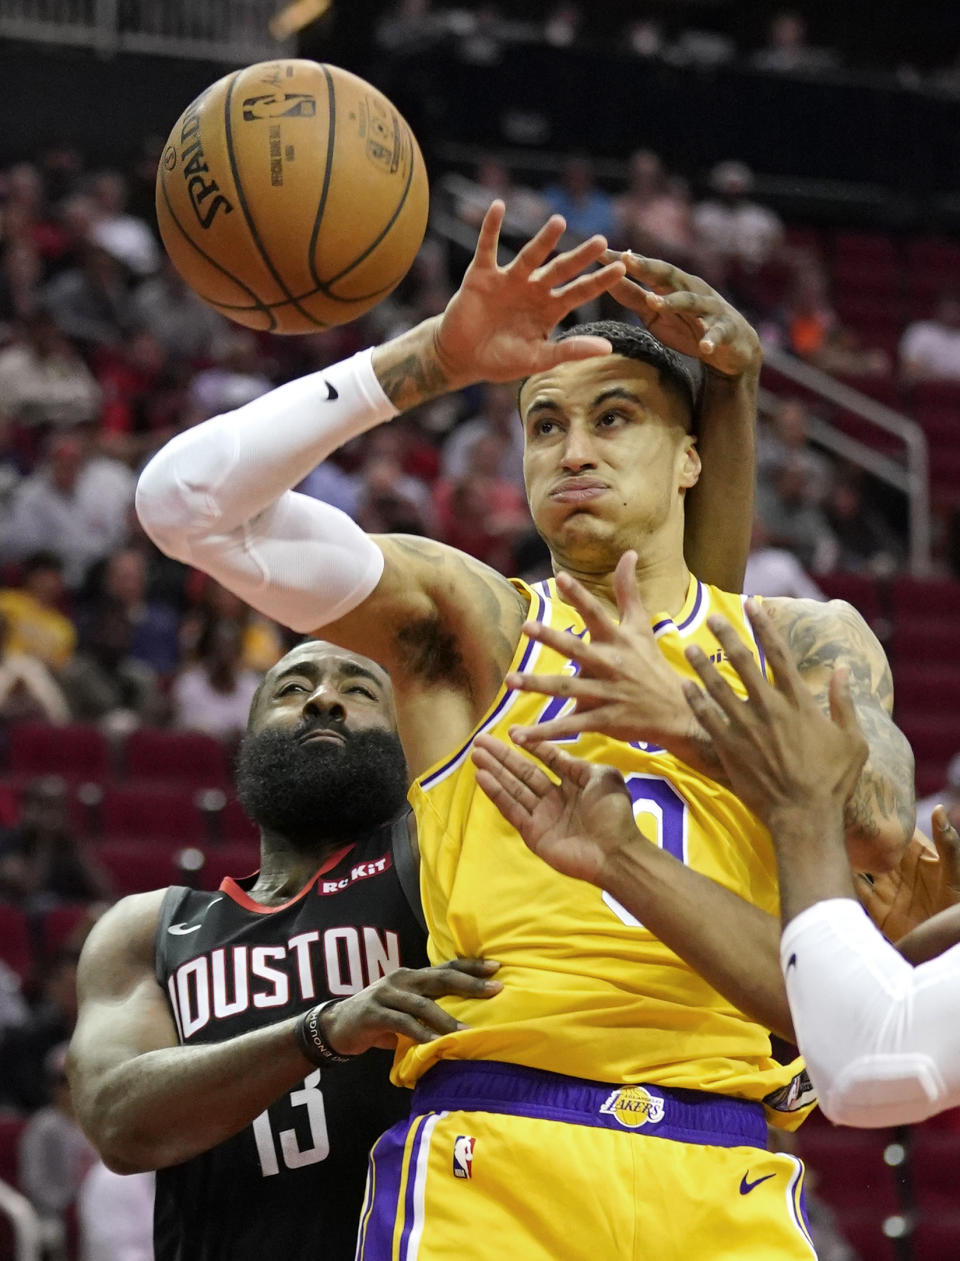 Houston Rockets' James Harden (13) knocks the ball from Los Angeles Lakers forward Kyle Kuzma (0) during the first half of an NBA basketball game Thursday, Dec. 13, 2018, in Houston. (AP Photo/David J. Phillip)